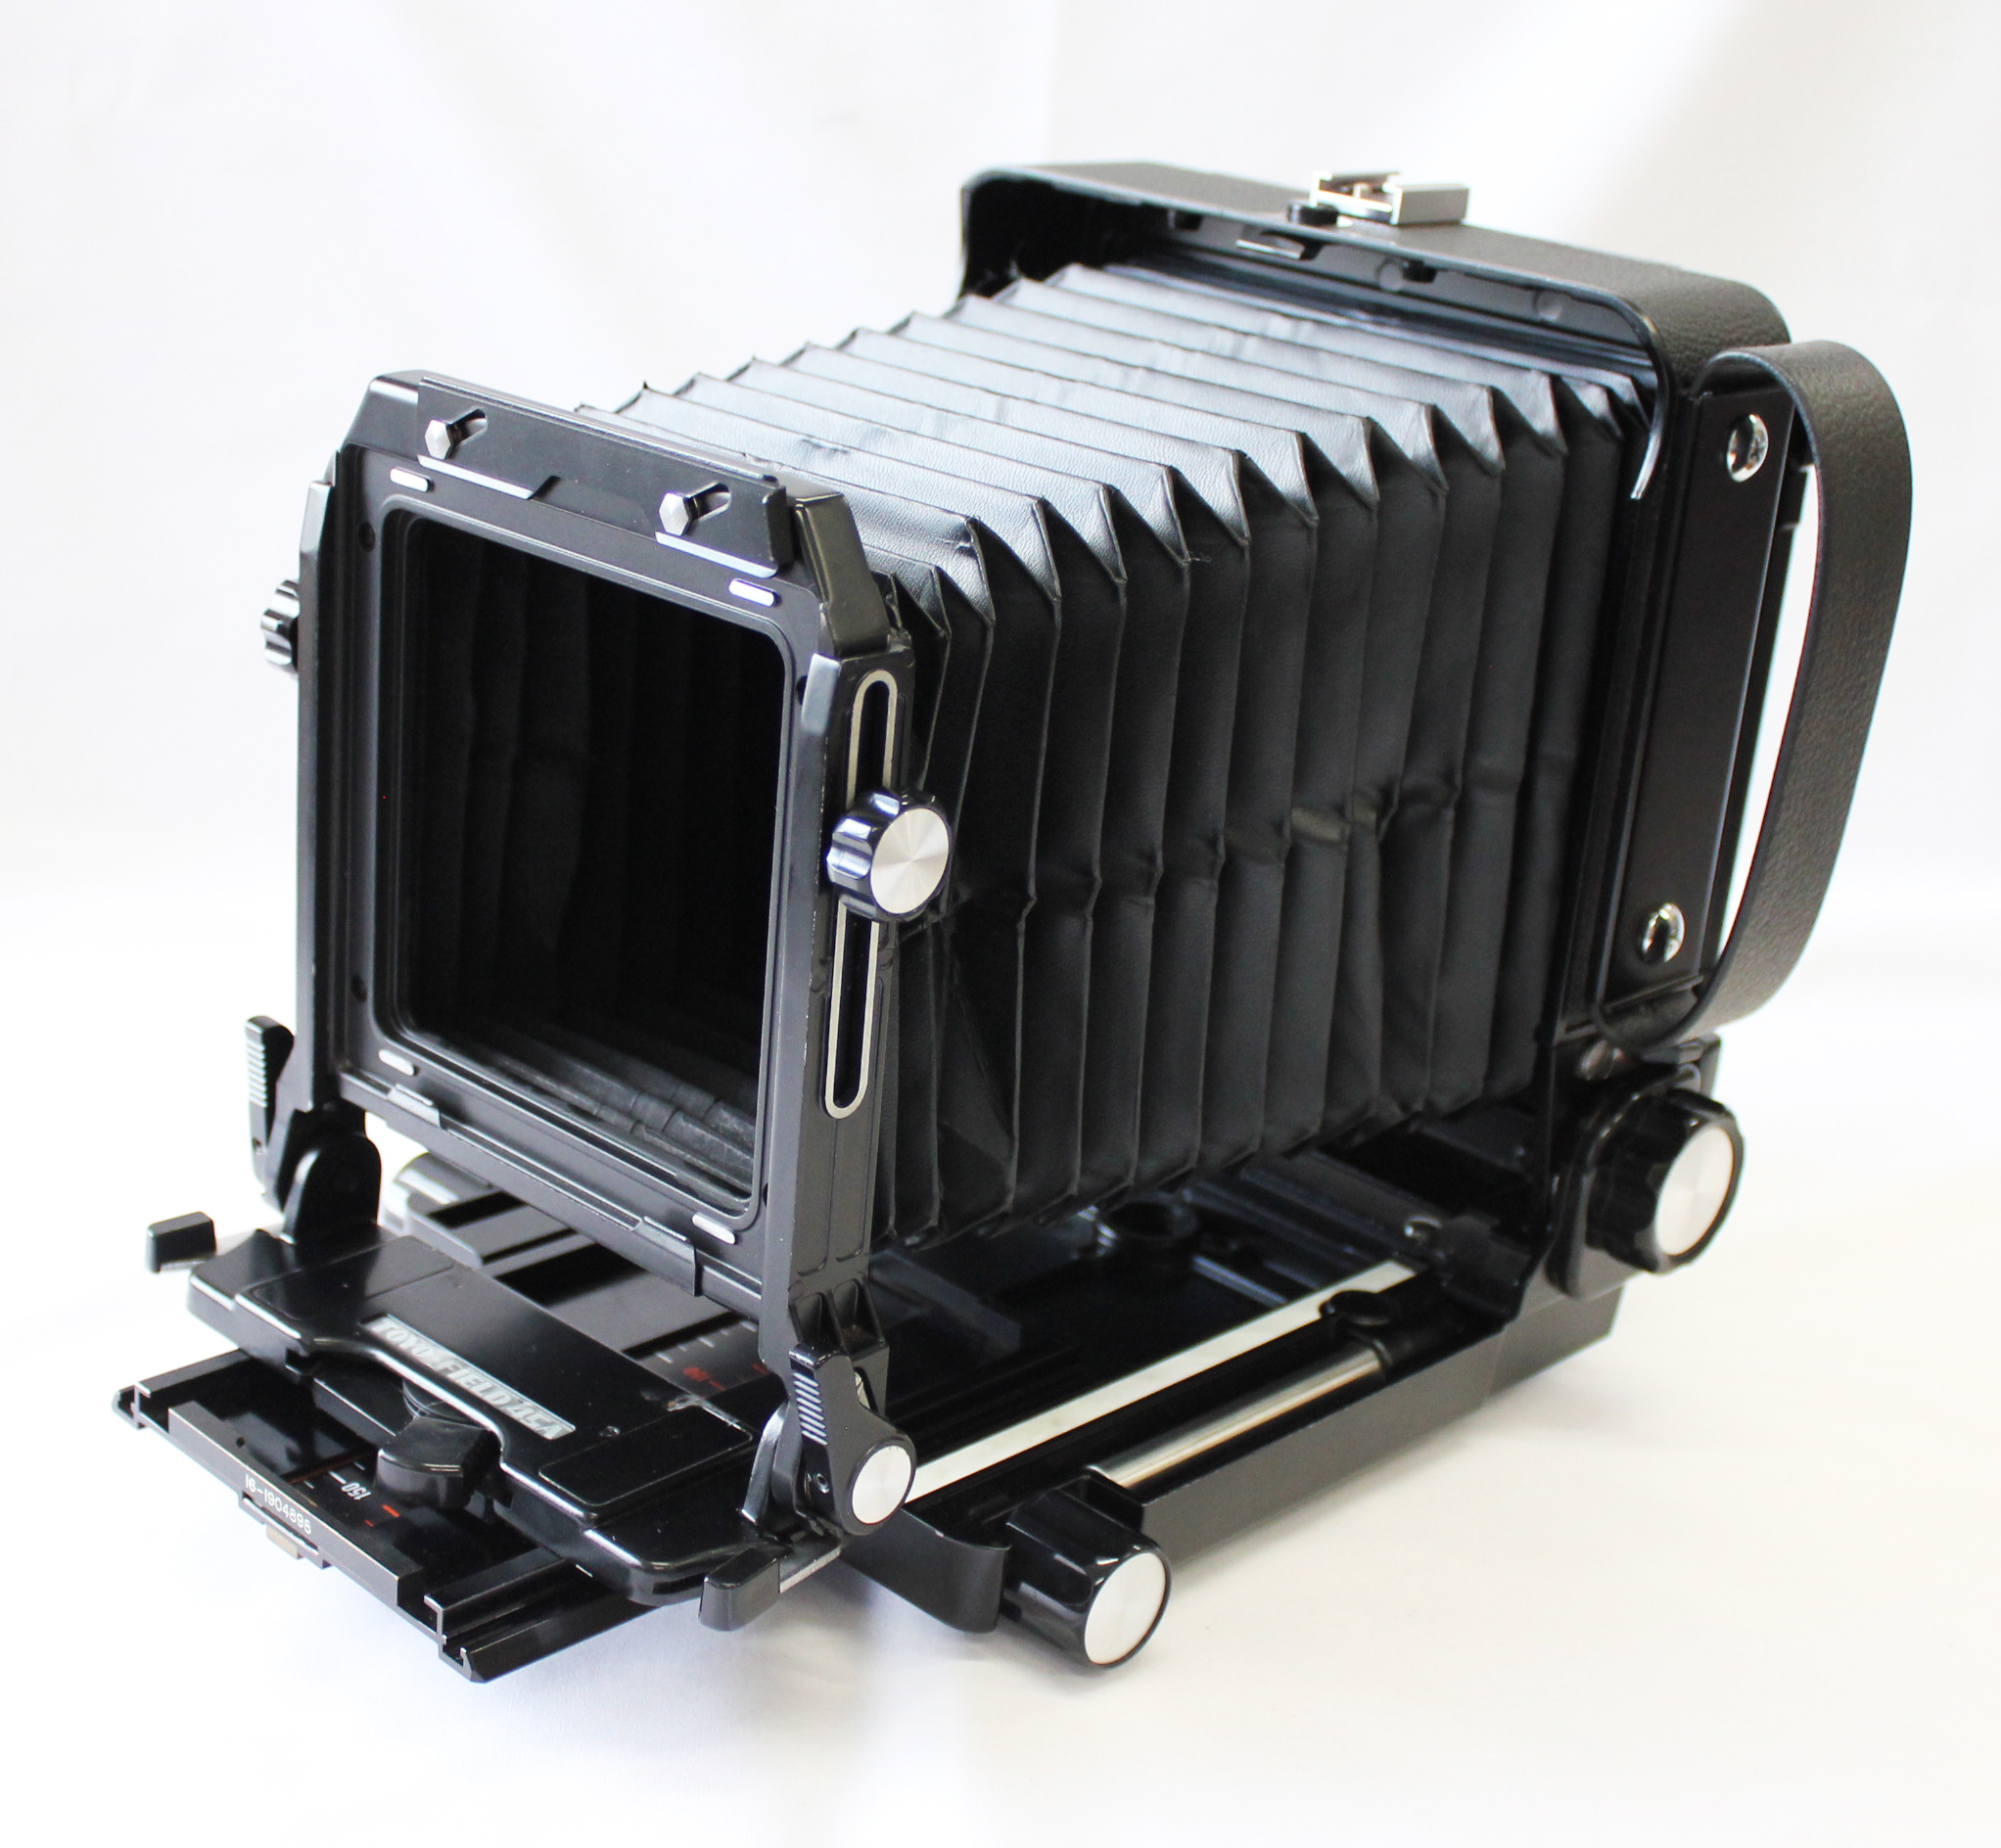 Japan Used Camera Shop | [Excellent+++++] Toyo Field 45A 4x5 Large Format Film Camera from Japan